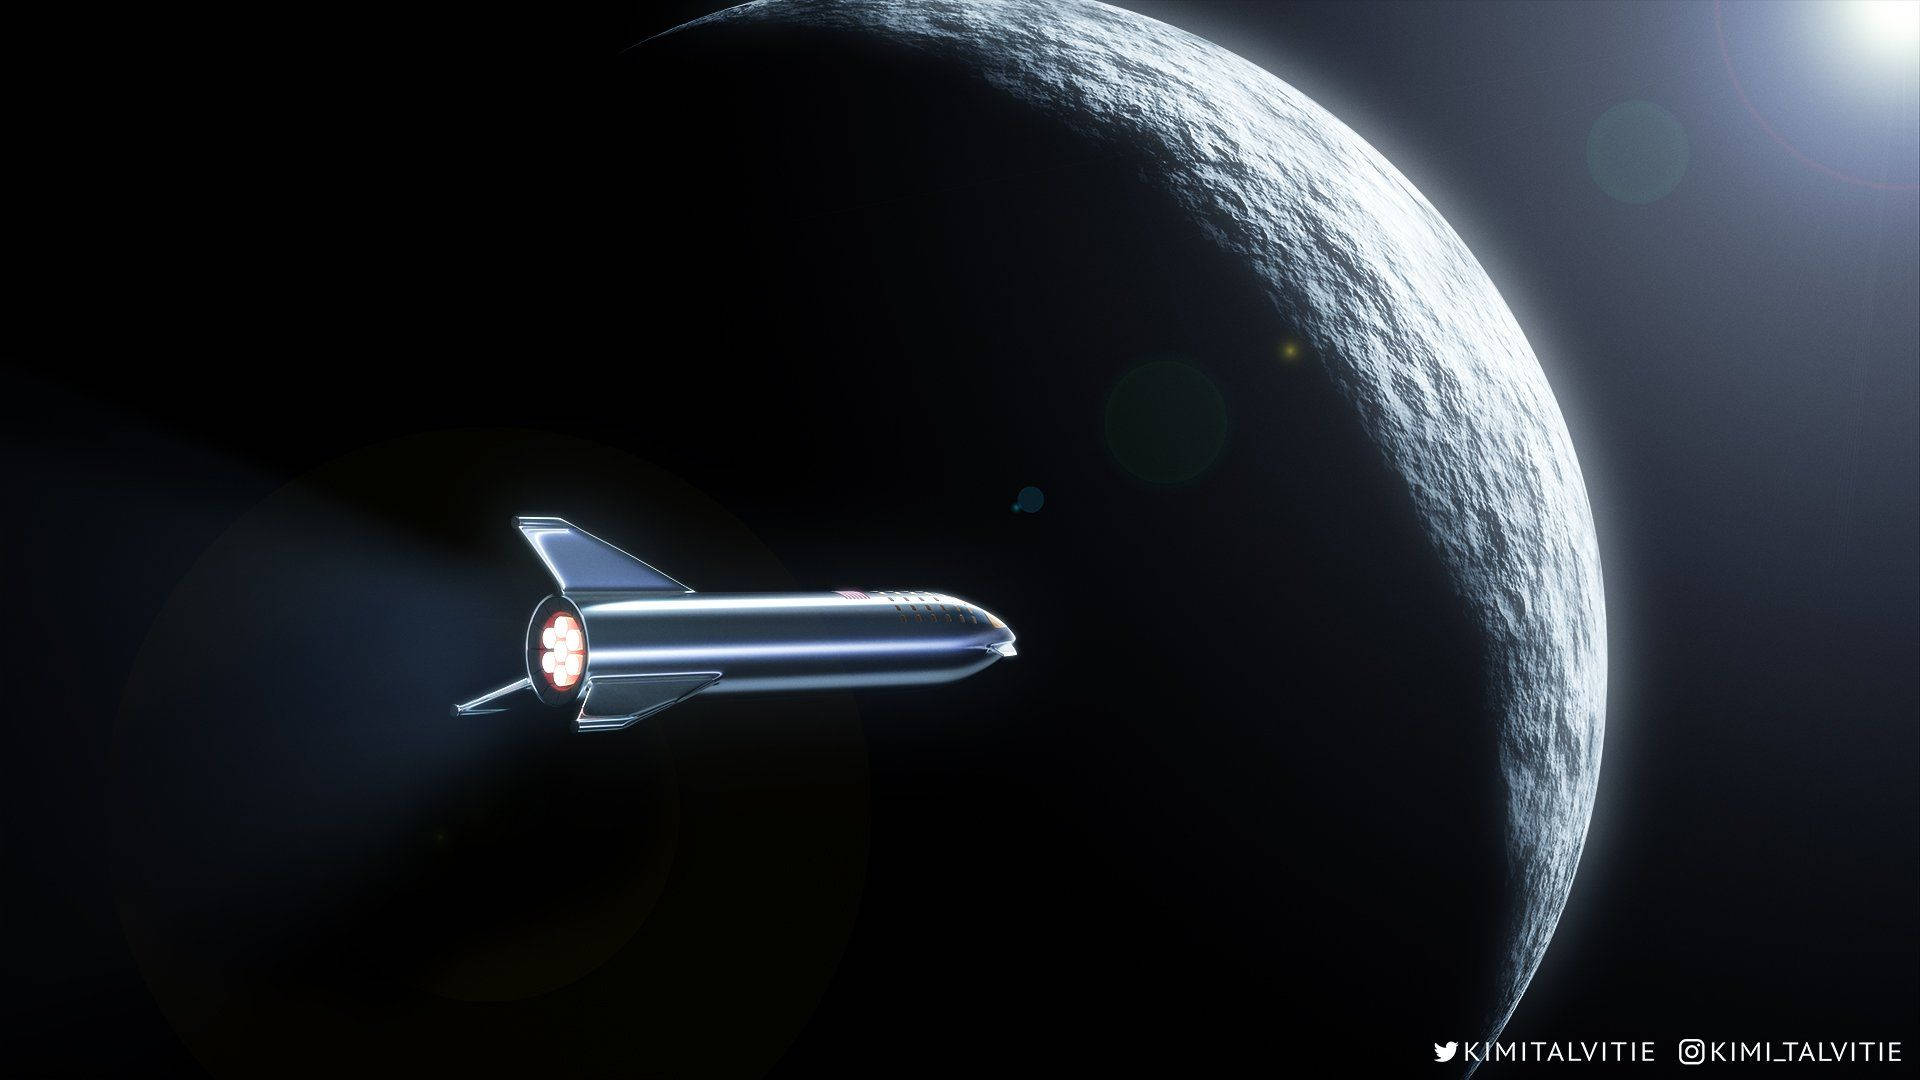 An up close look at the revolutionary SpaceX Starship Wallpaper